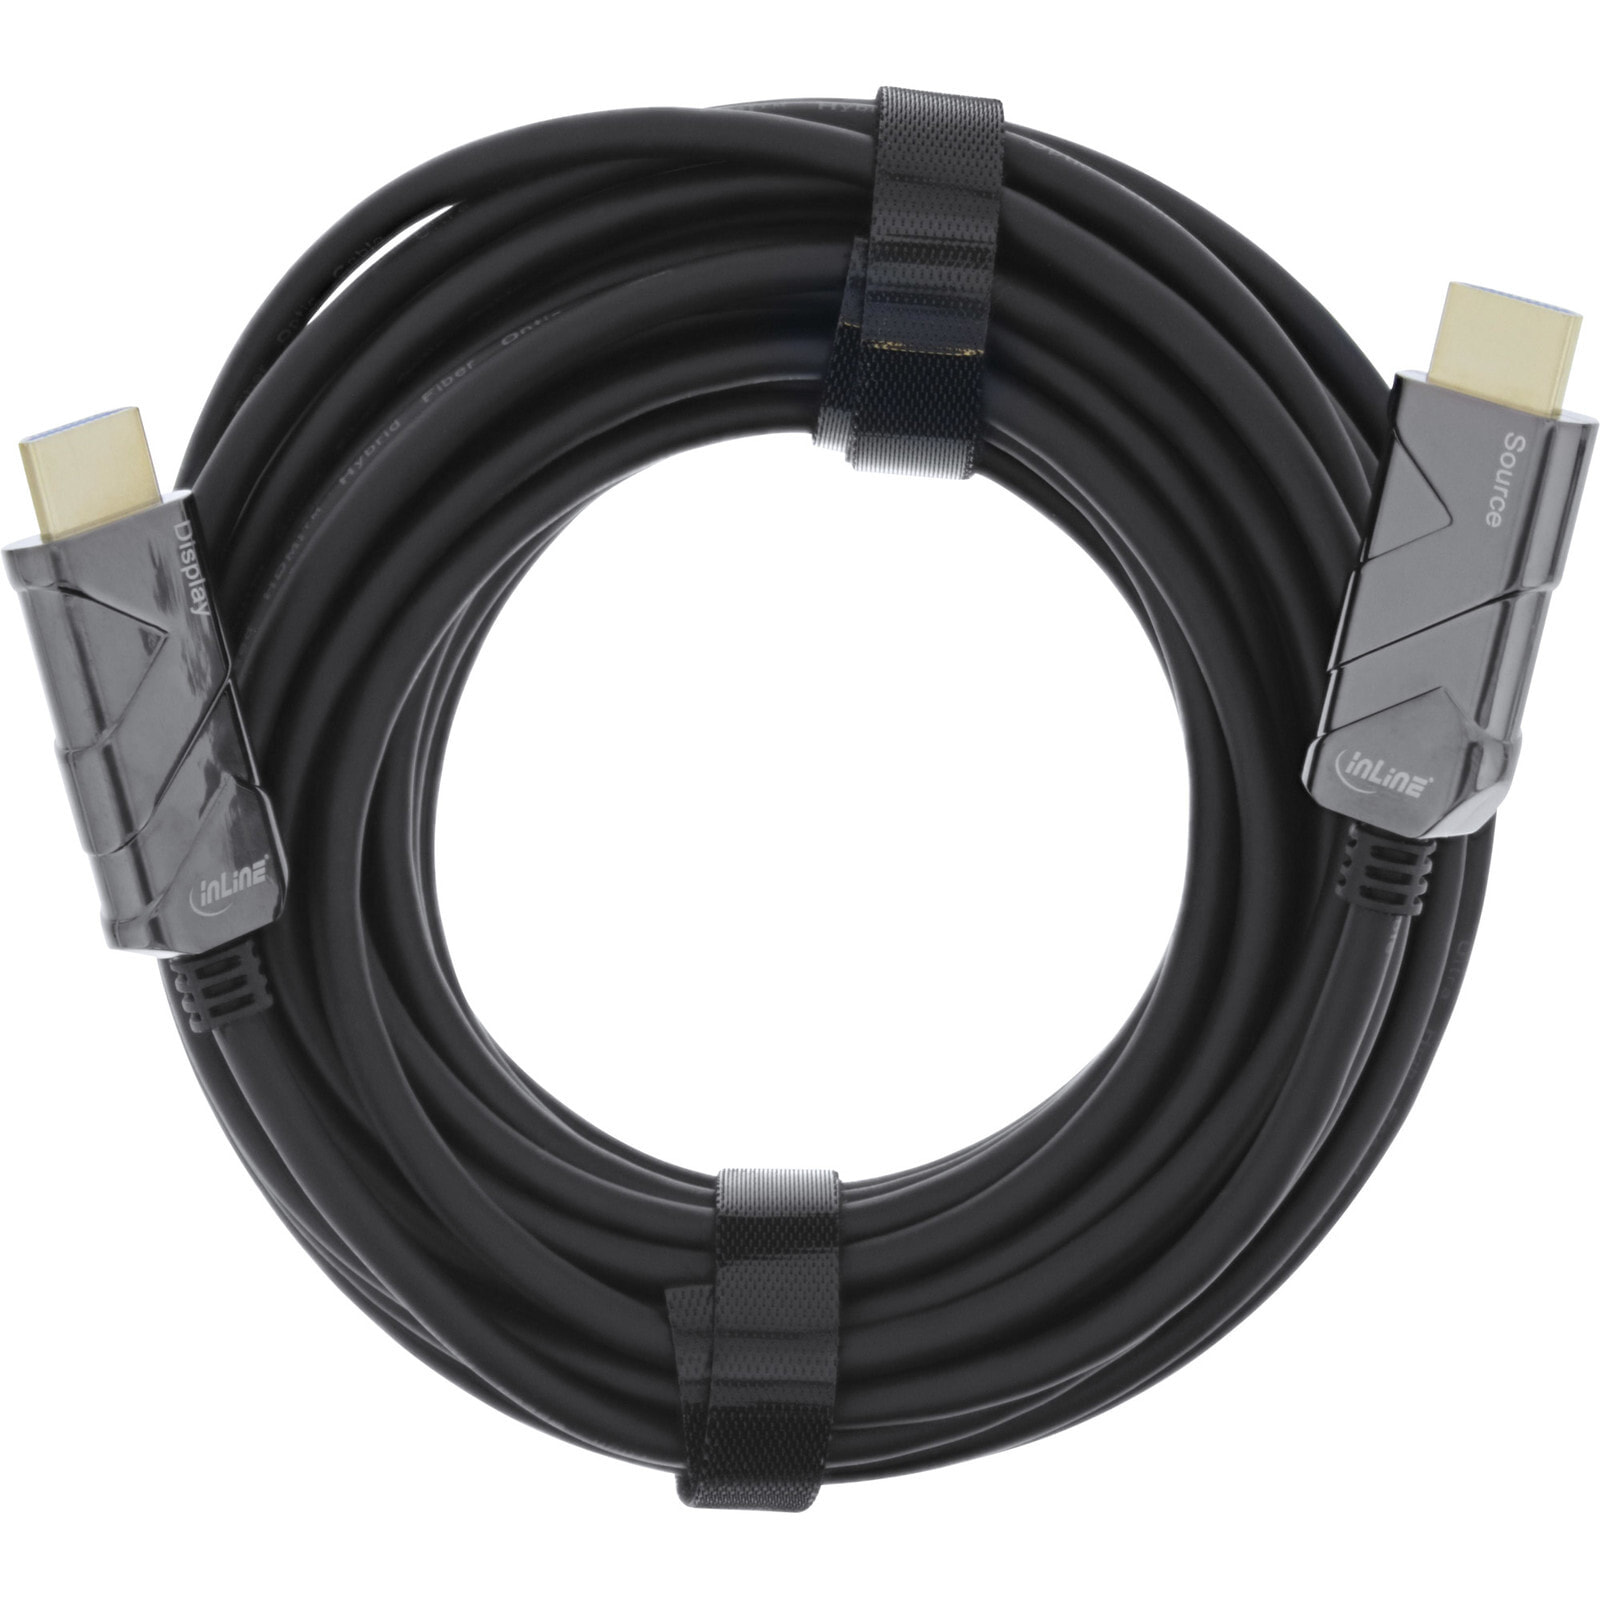 HDMI AOC Cable - Ultra High Speed HDMI Cable - 8K4K - black - 80m